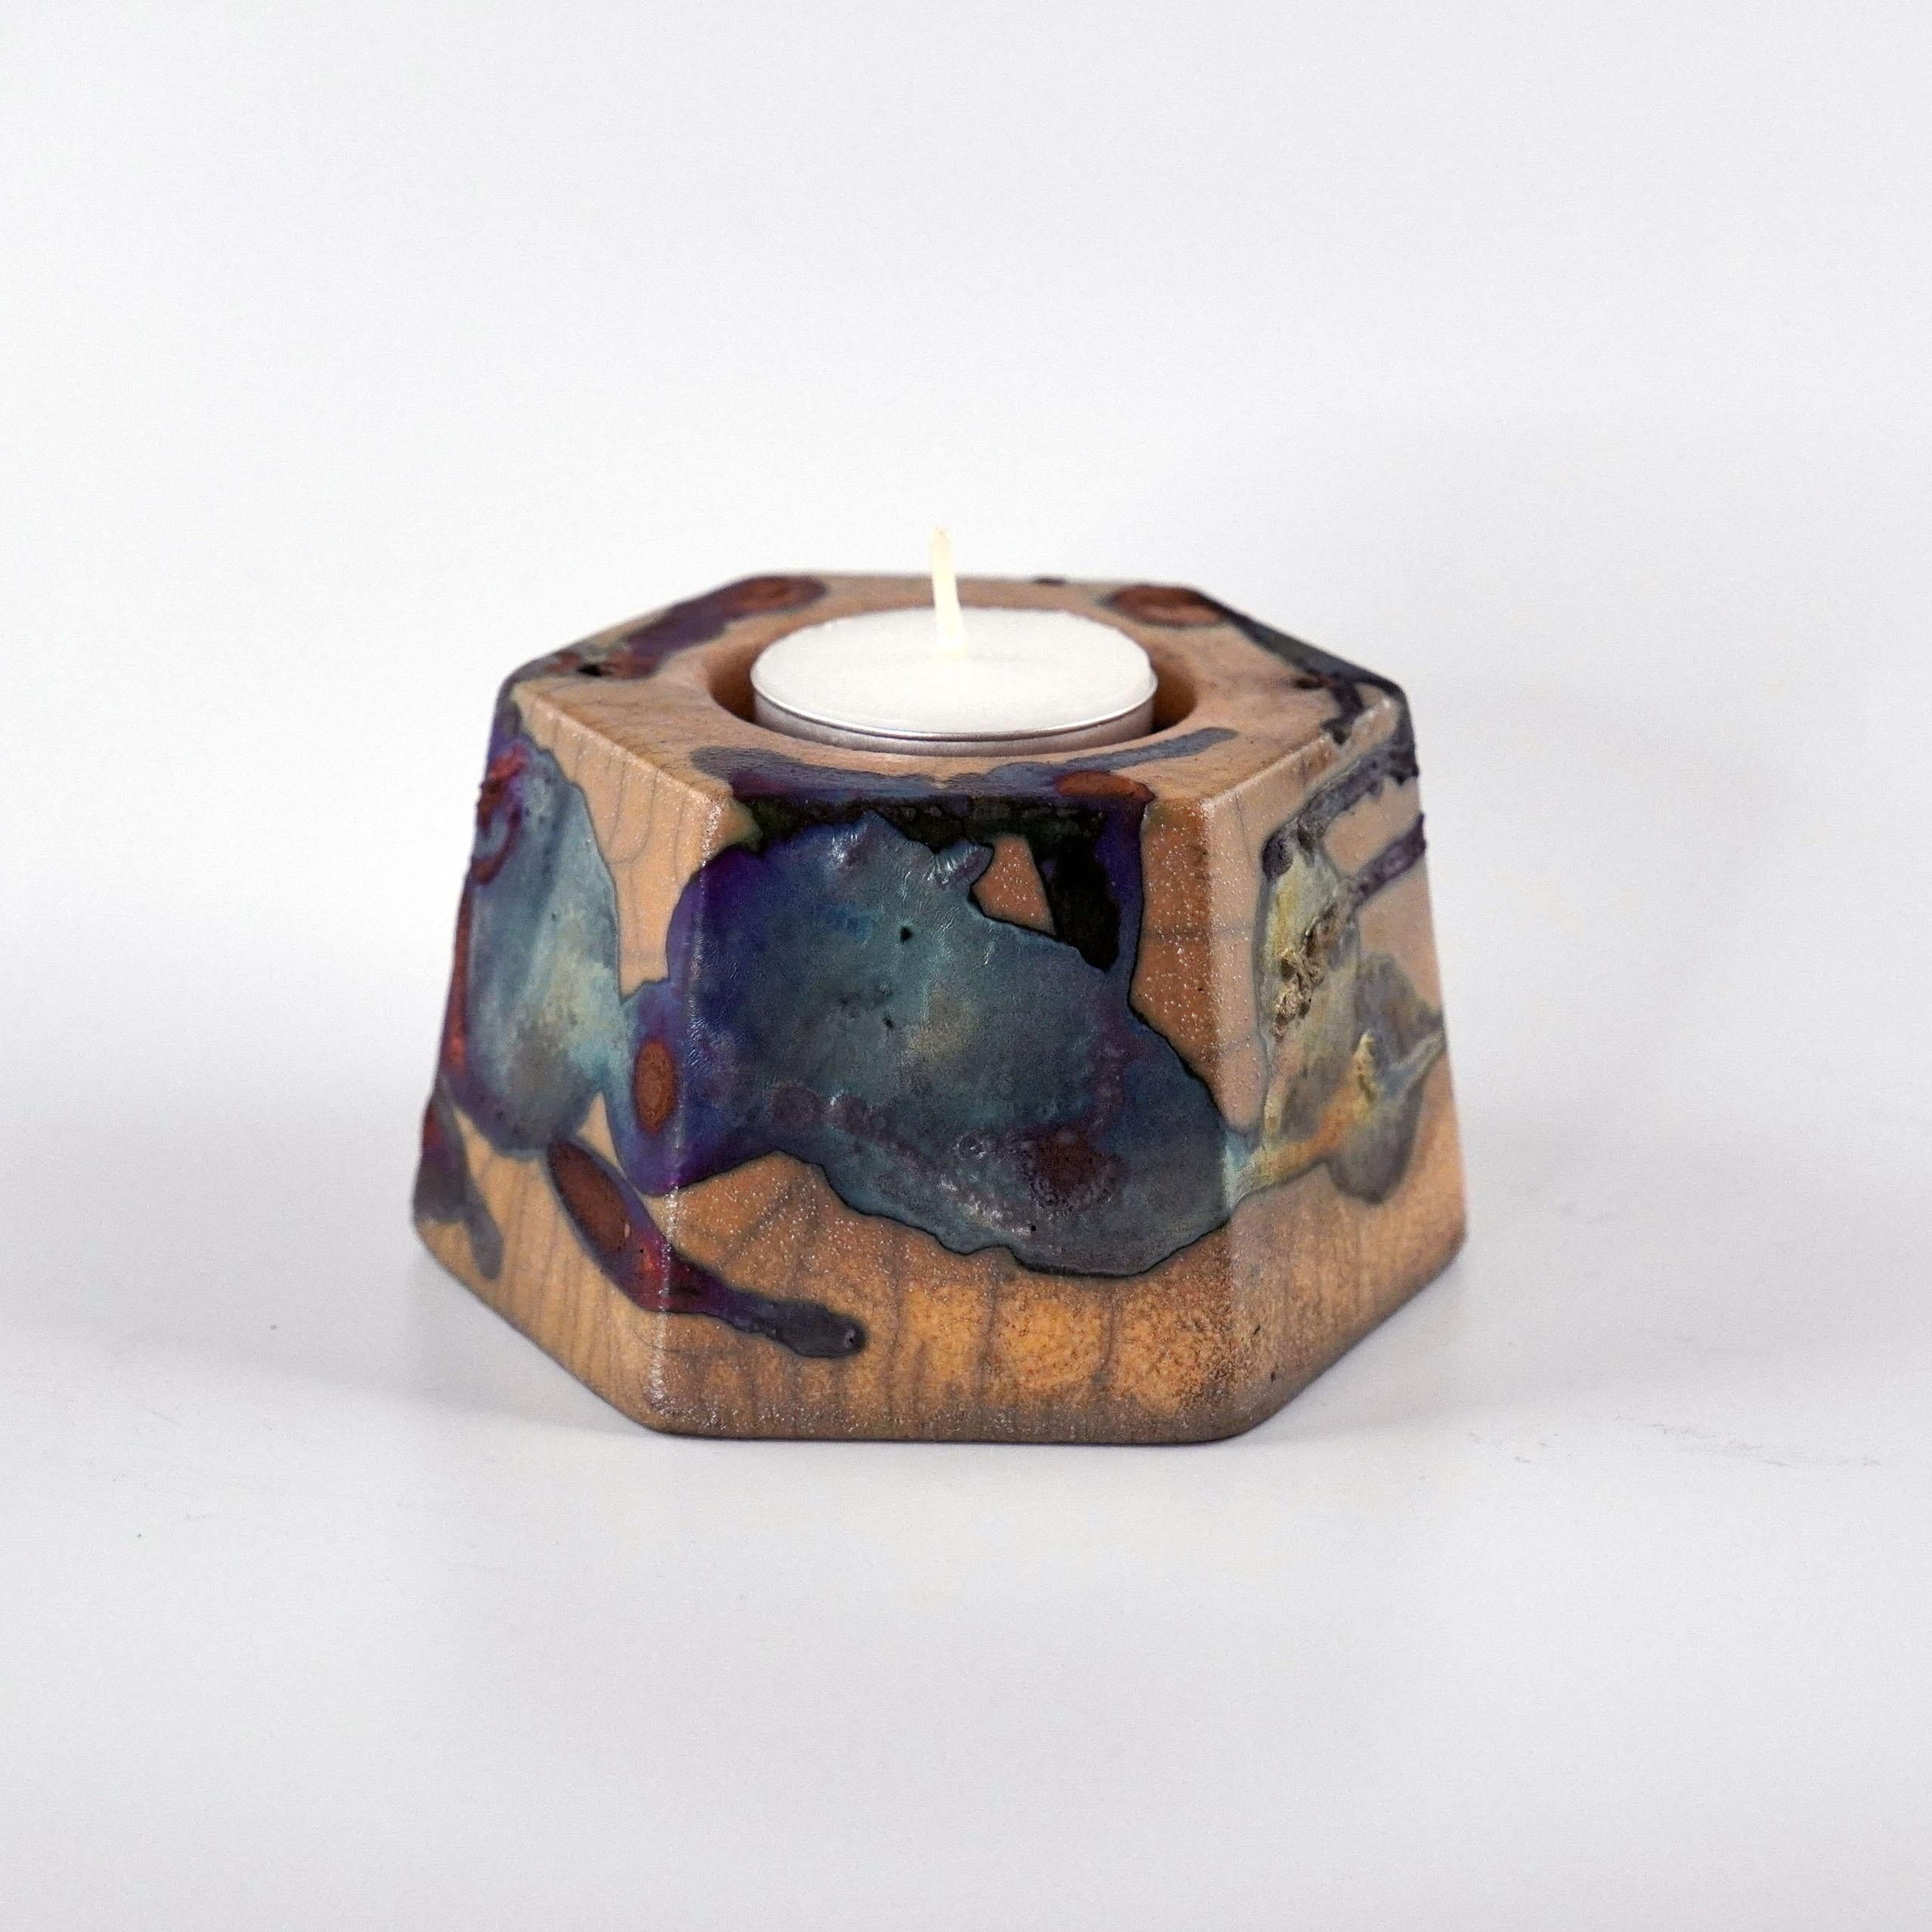 Keihatsu 啓発 - Enlightenment

Our Keihatsu tealight, candle and incense holder makes a perfect accessory to an office, bath, workspace or table. Its geometrical form is both functional, aesthetic and one of a kind. You can use it as a set of one, two